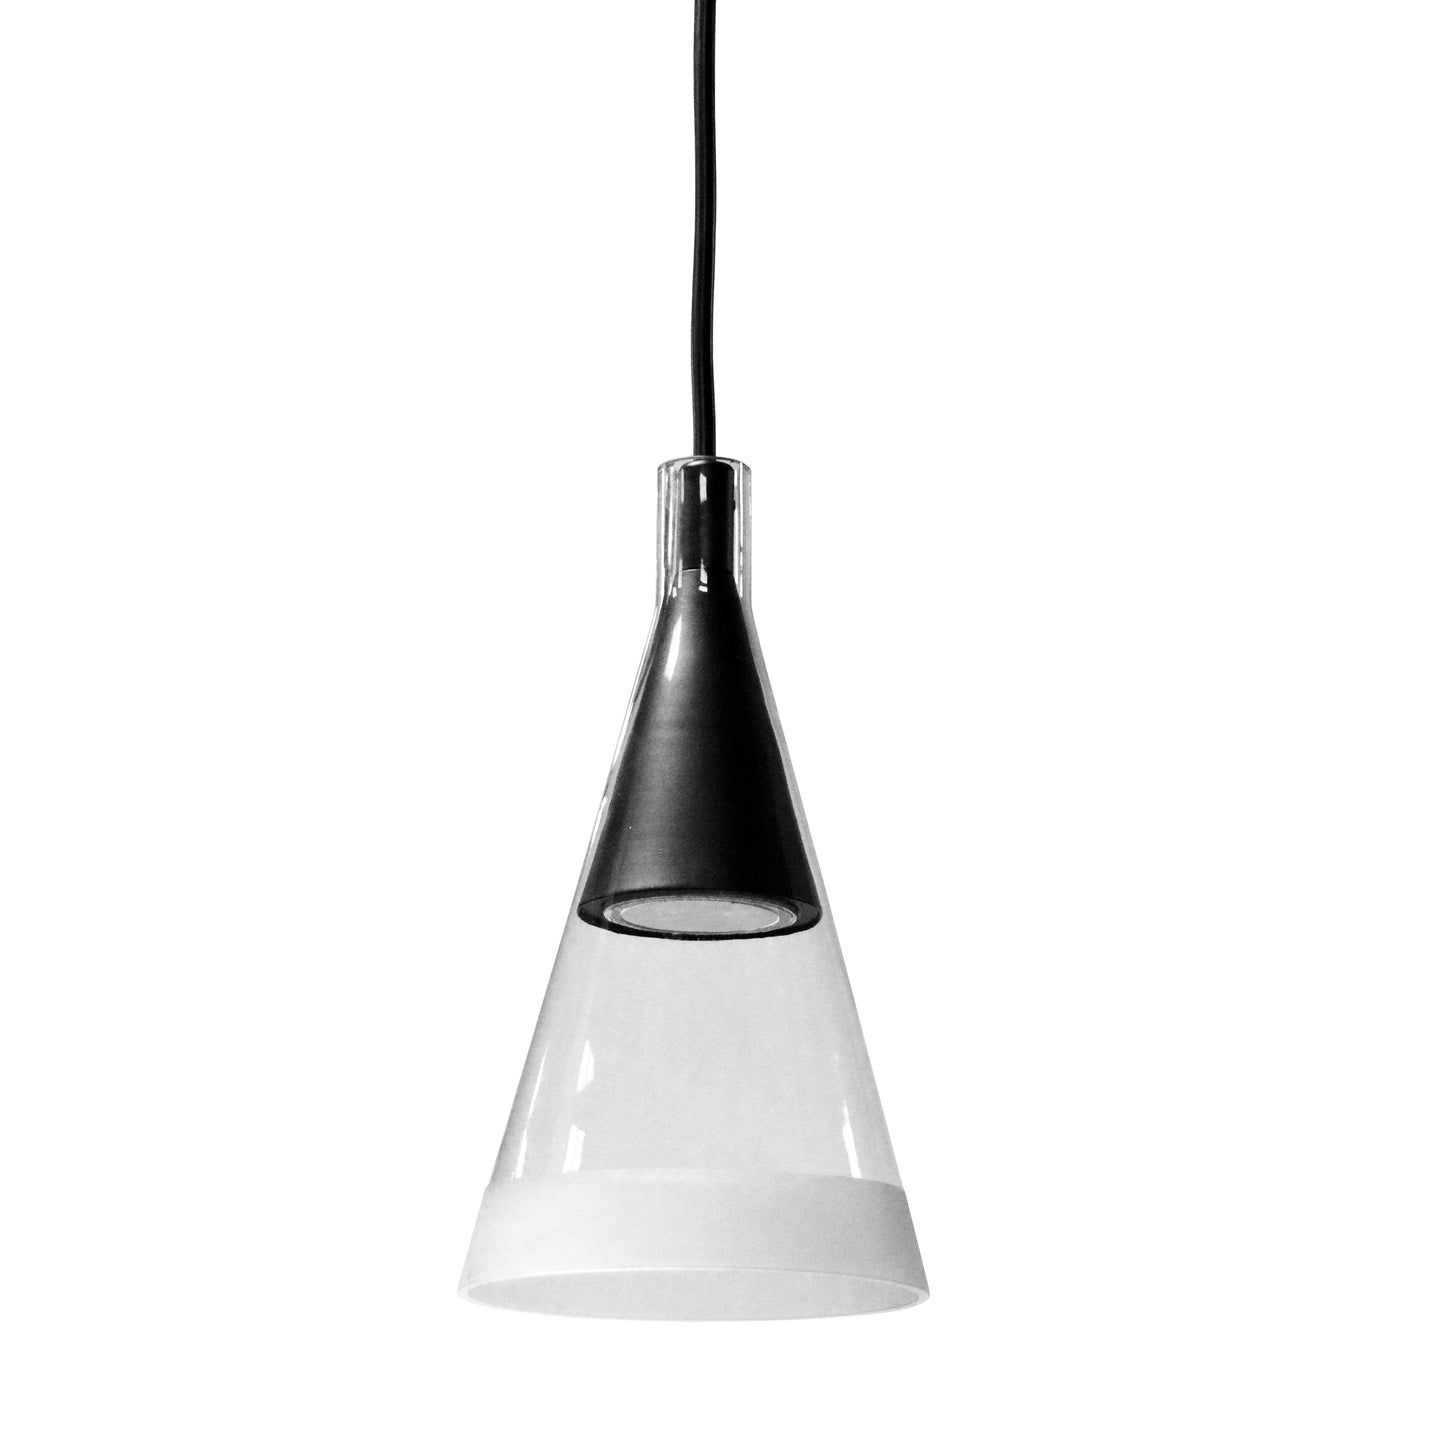 Dainolite 1 Light Halogen Pendant Matte Black Finish with Clear and Frosted Trim Glass - Renoz